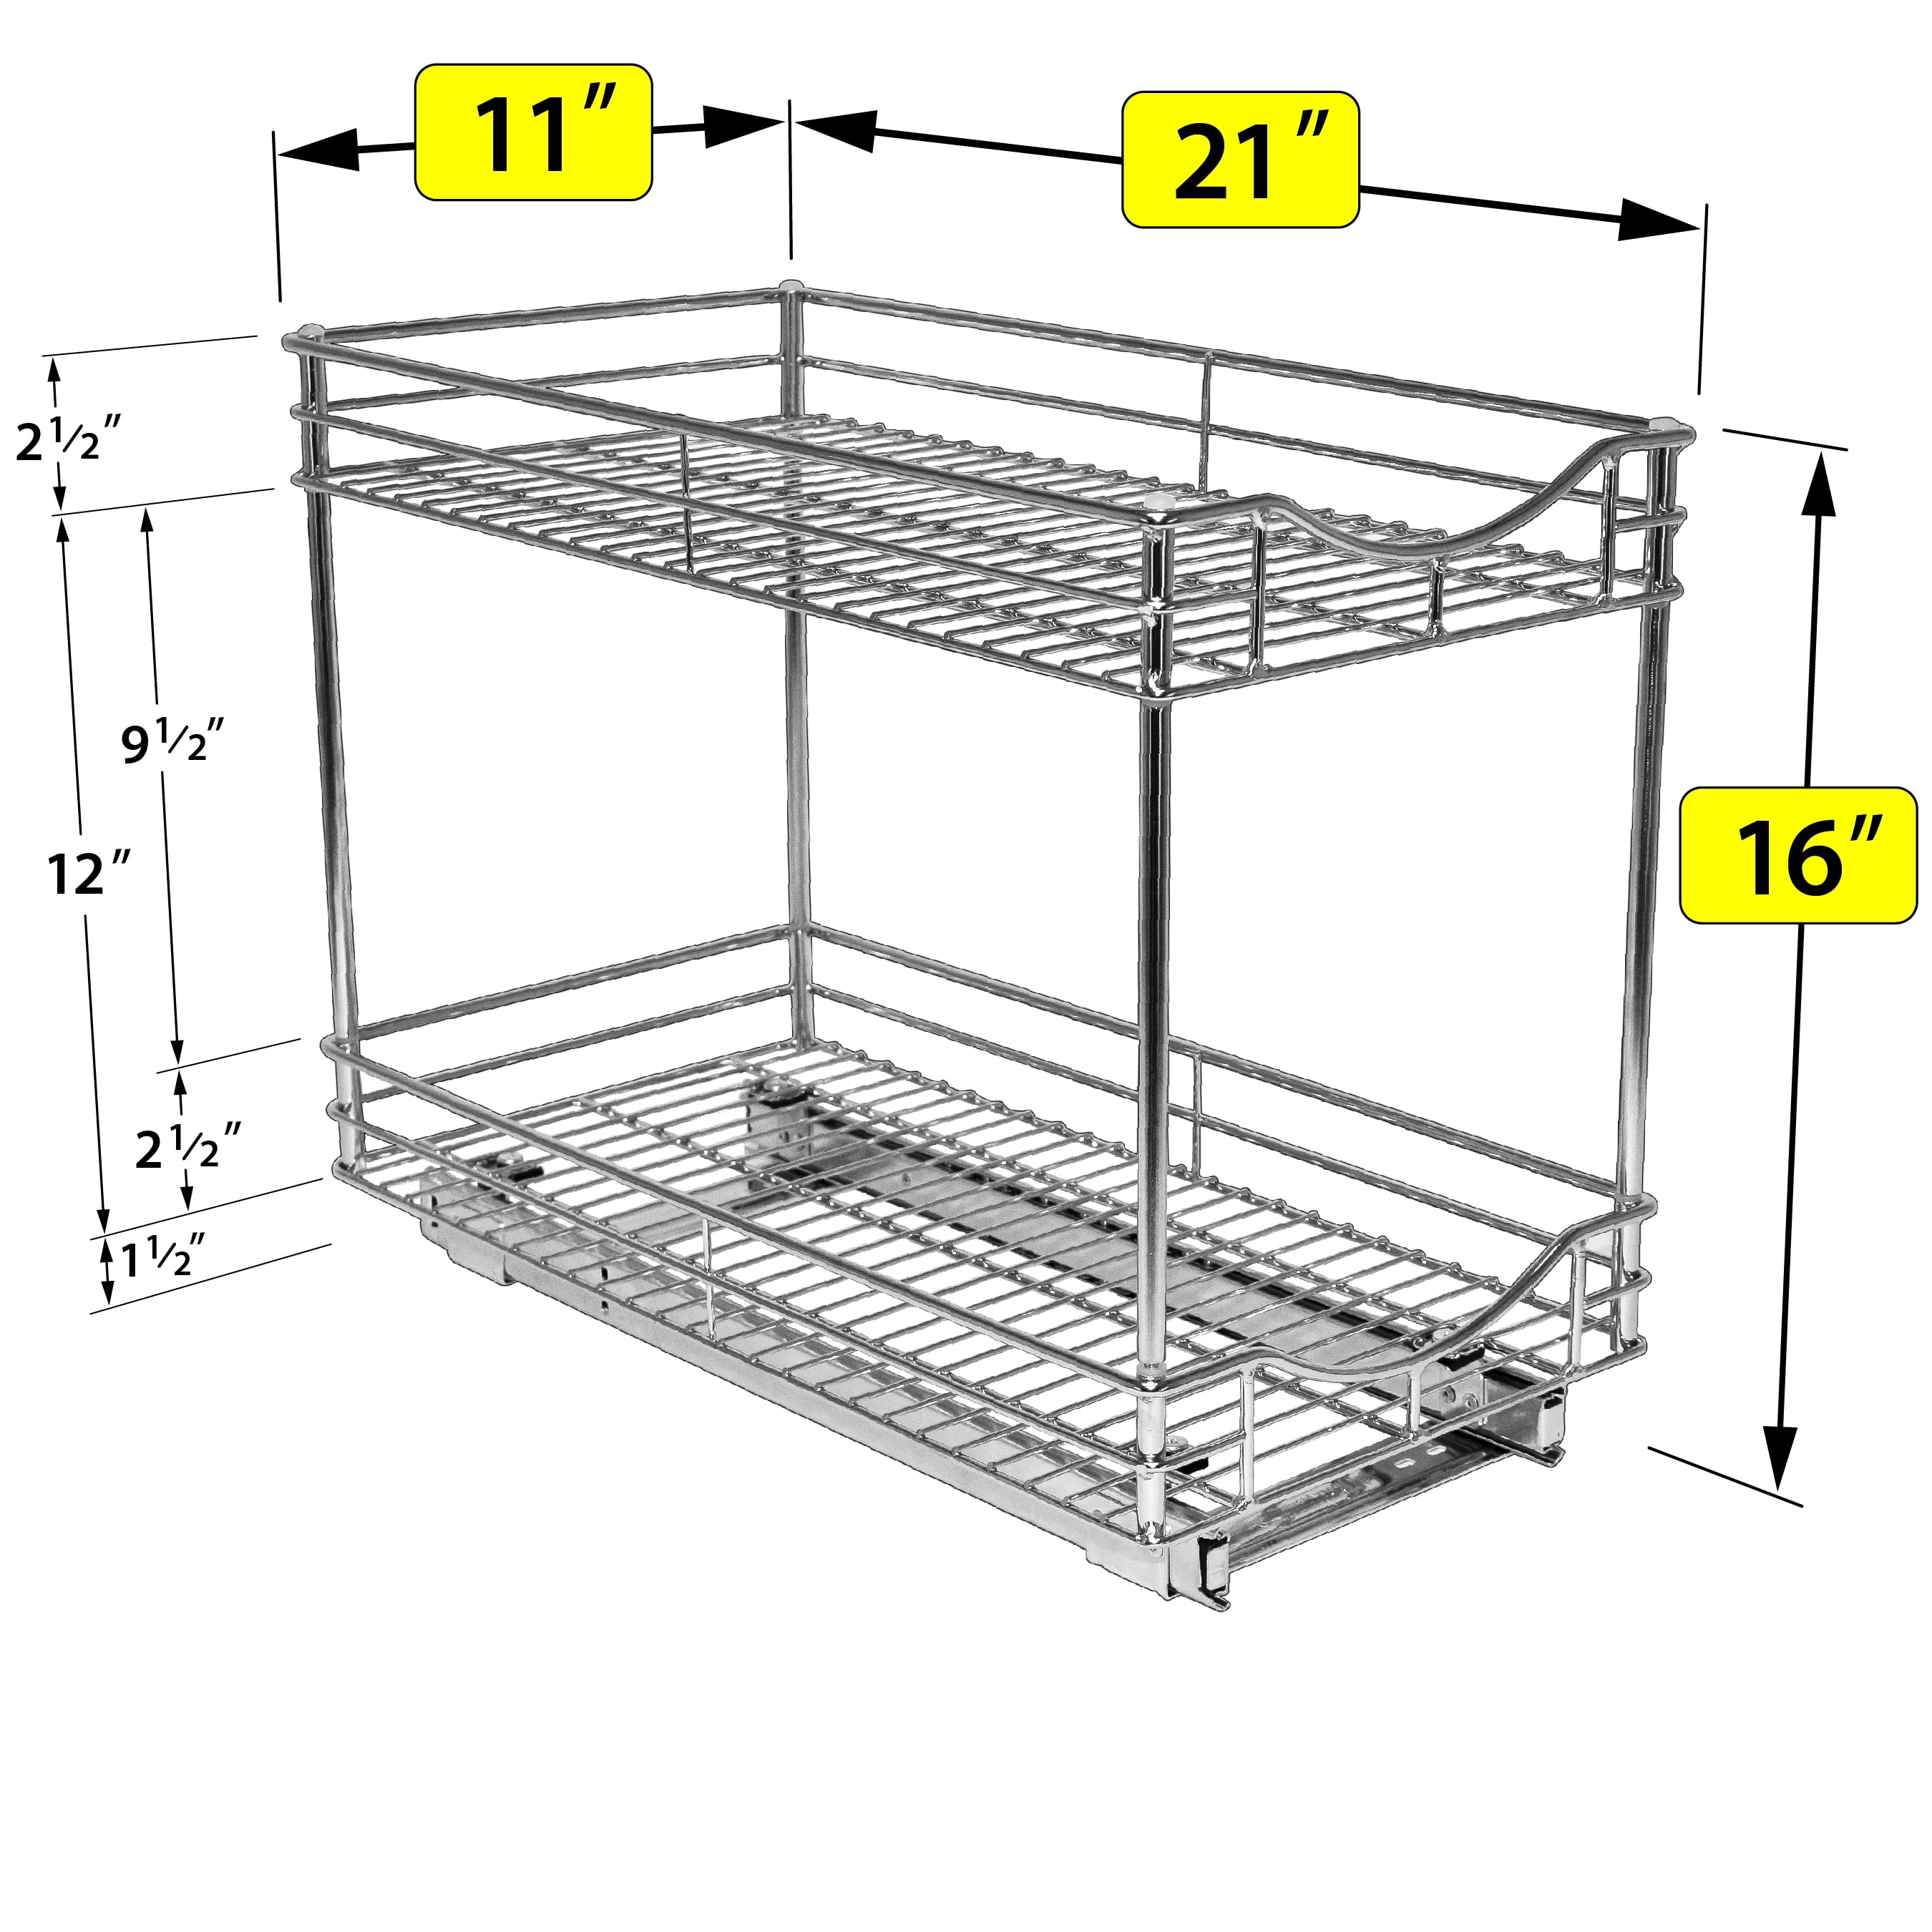 Double Soft Closing Slide Out Drawers with dividers - Fits Best in B18, RTA  Cabinet Organizers - LAC4PIL-18SC-2